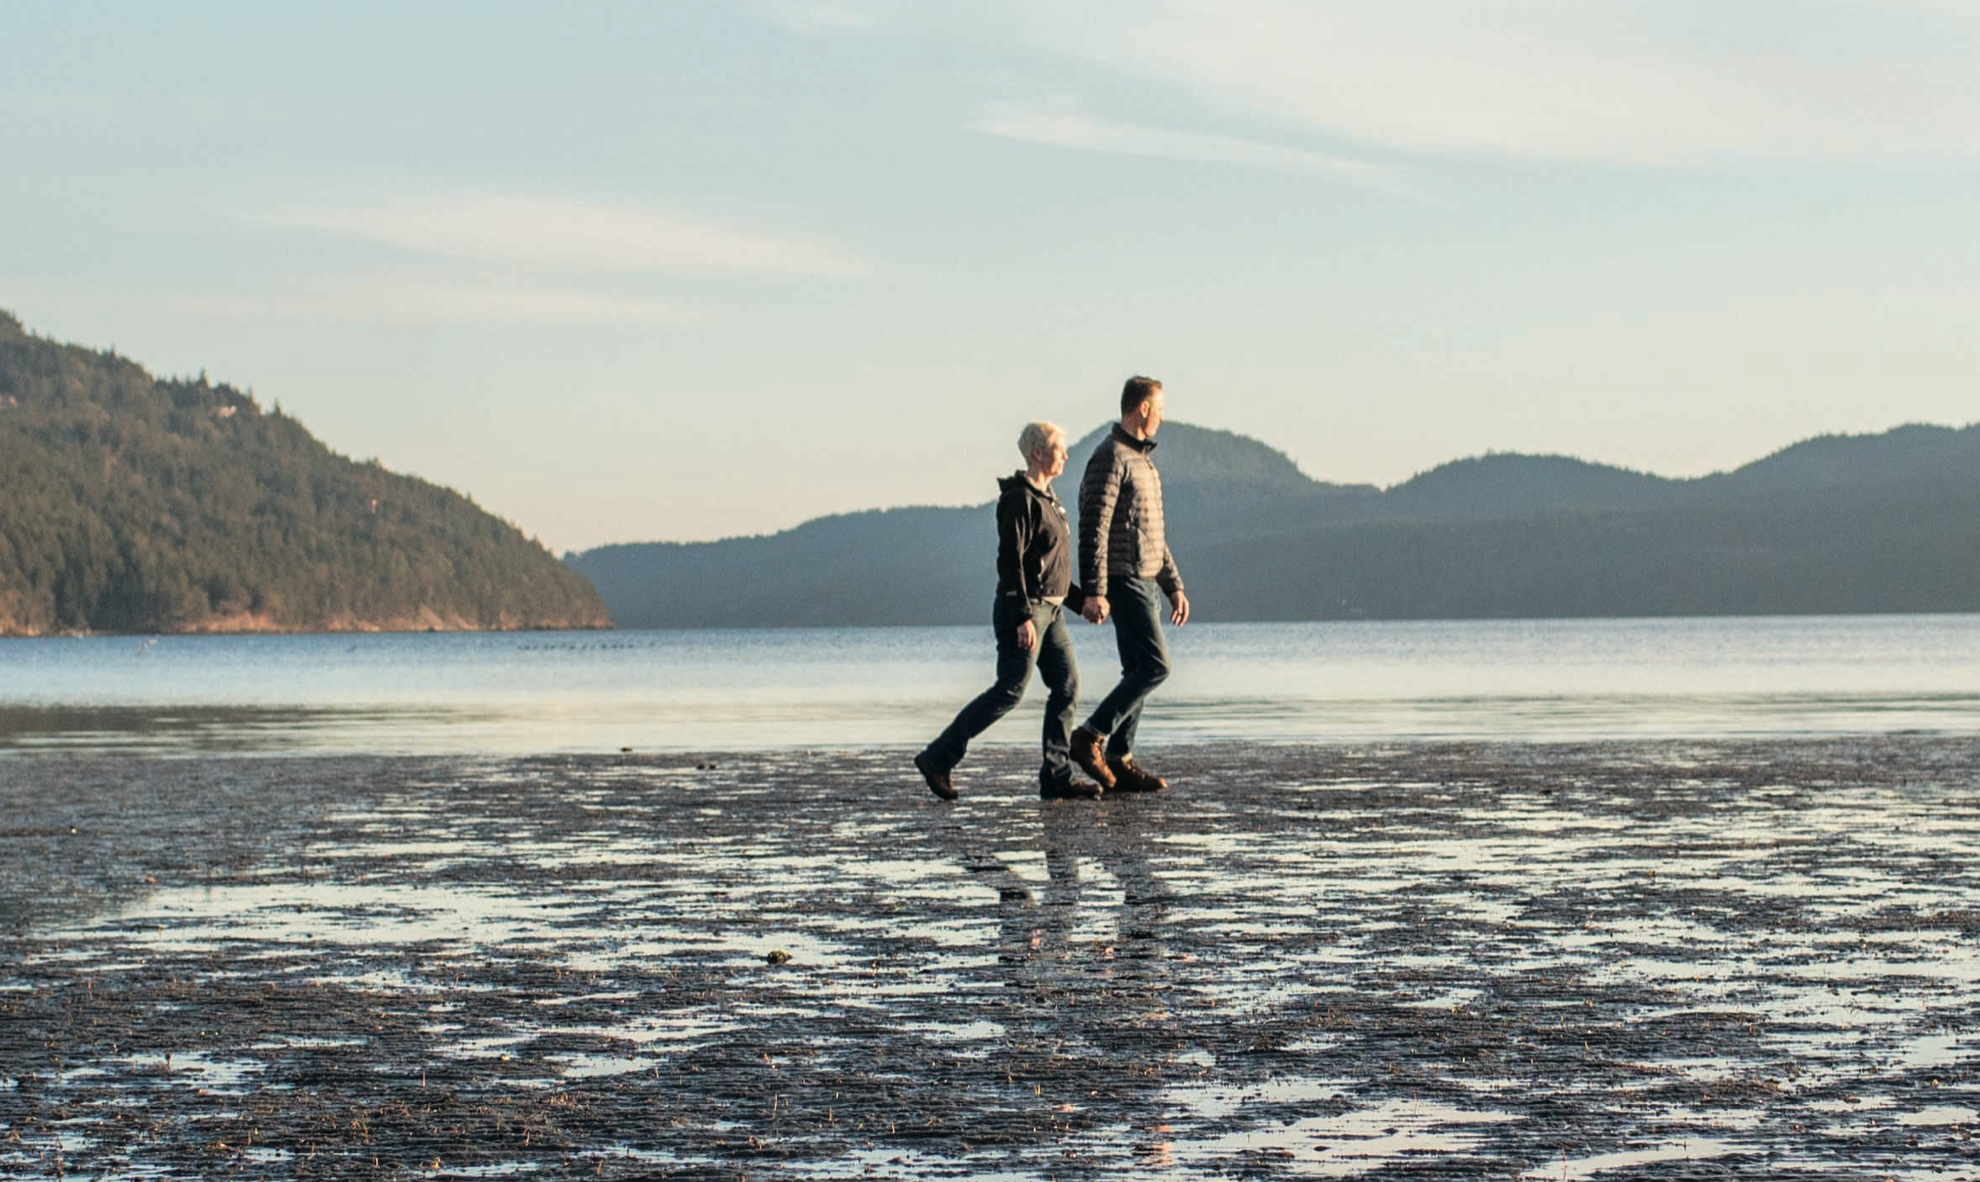 A couple walks along the shore, appreciating the nice view of nature